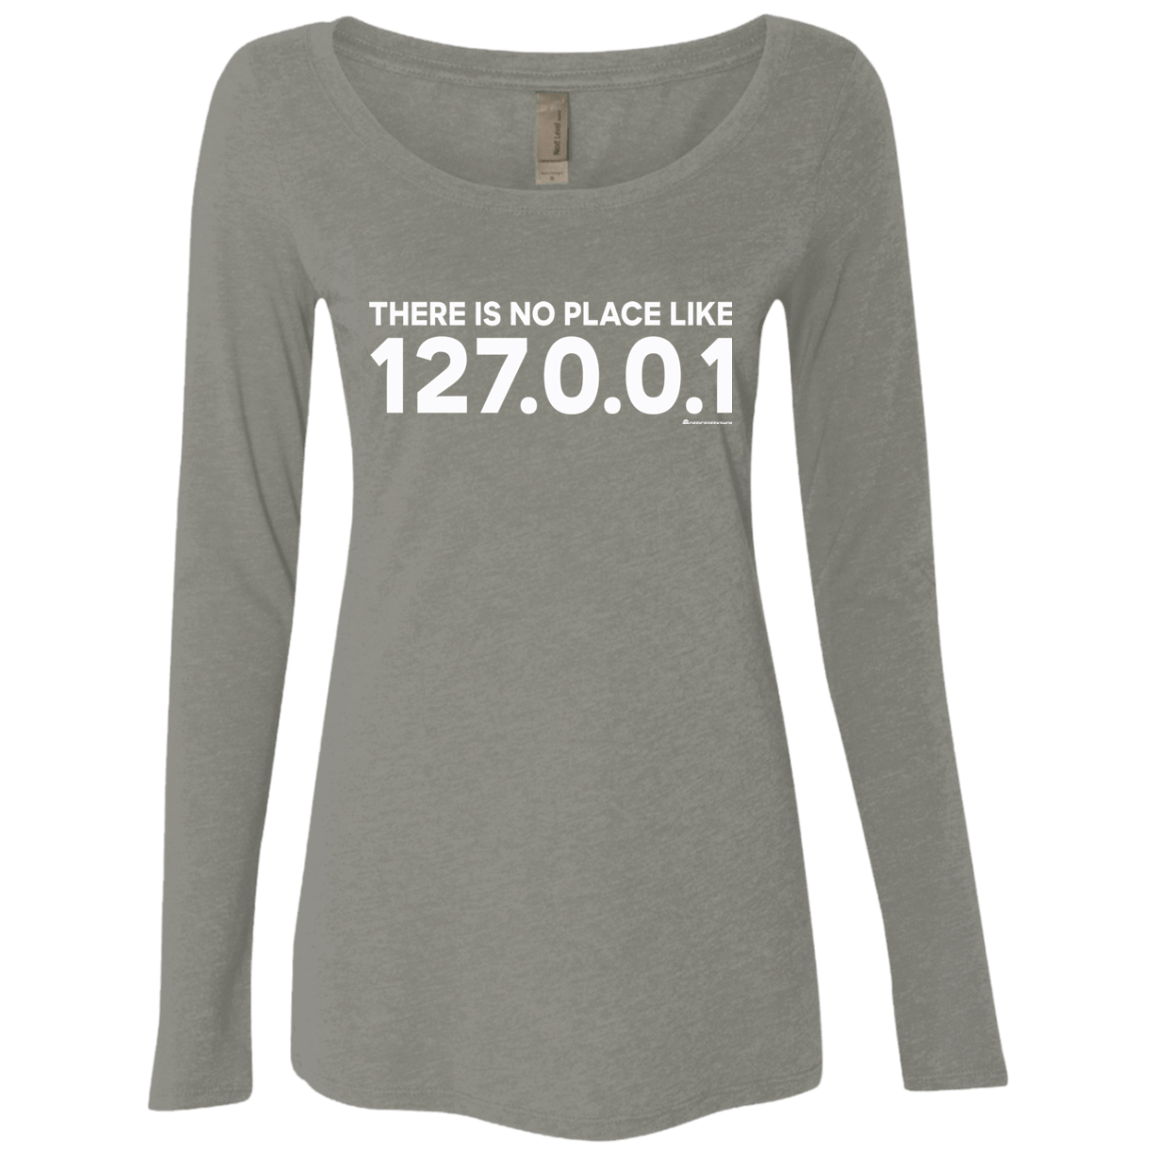 T-Shirts Venetian Grey / Small There Is No Place Like 127.0.0.1 Women's Triblend Long Sleeve Shirt